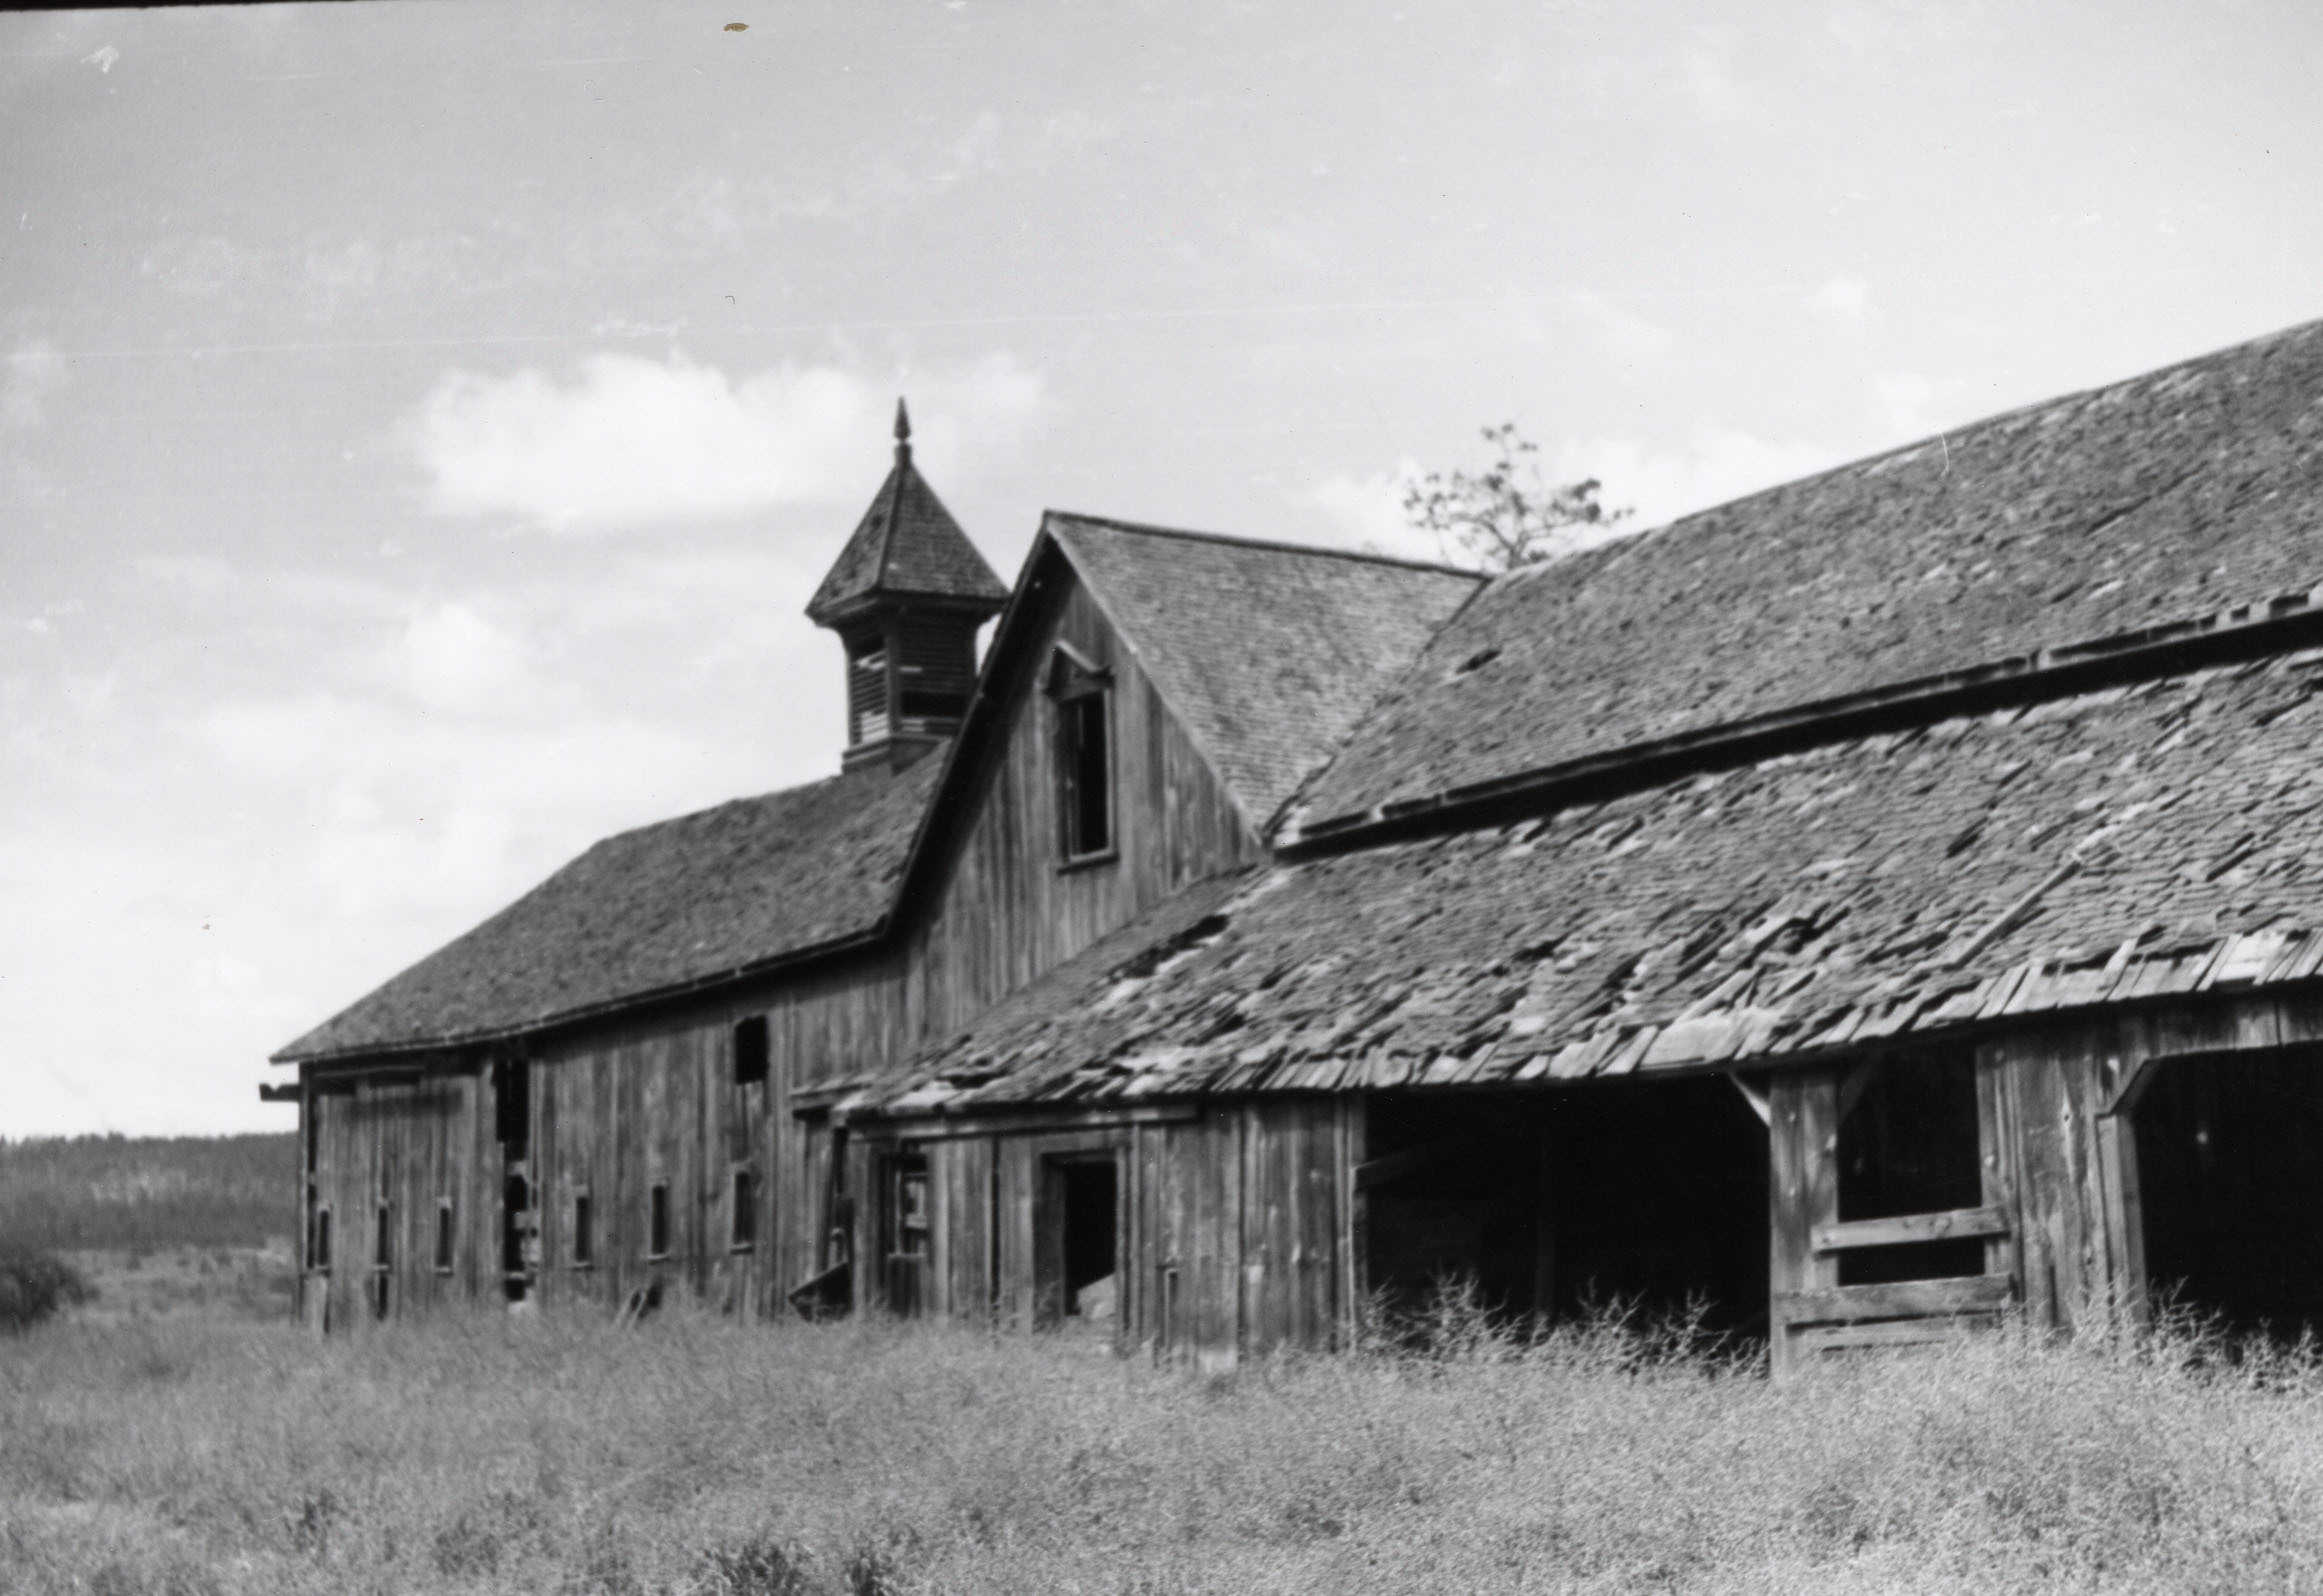 Black and white photograph of dilapidated barn